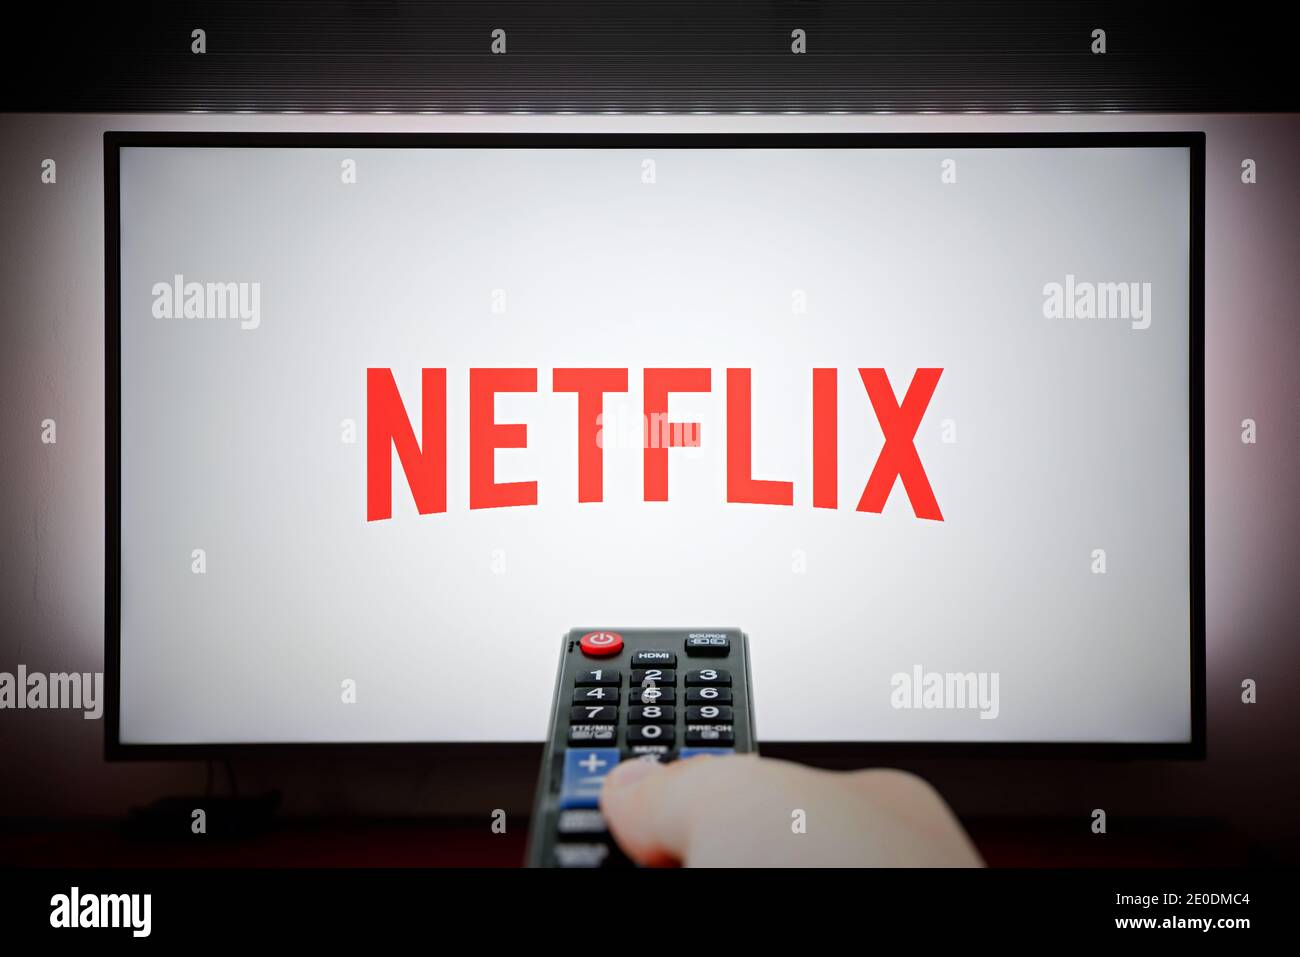 Wroclaw, Poland - OCT 13, 2020: Netflix is a global provider of streaming movies and TV series. Stock Photo